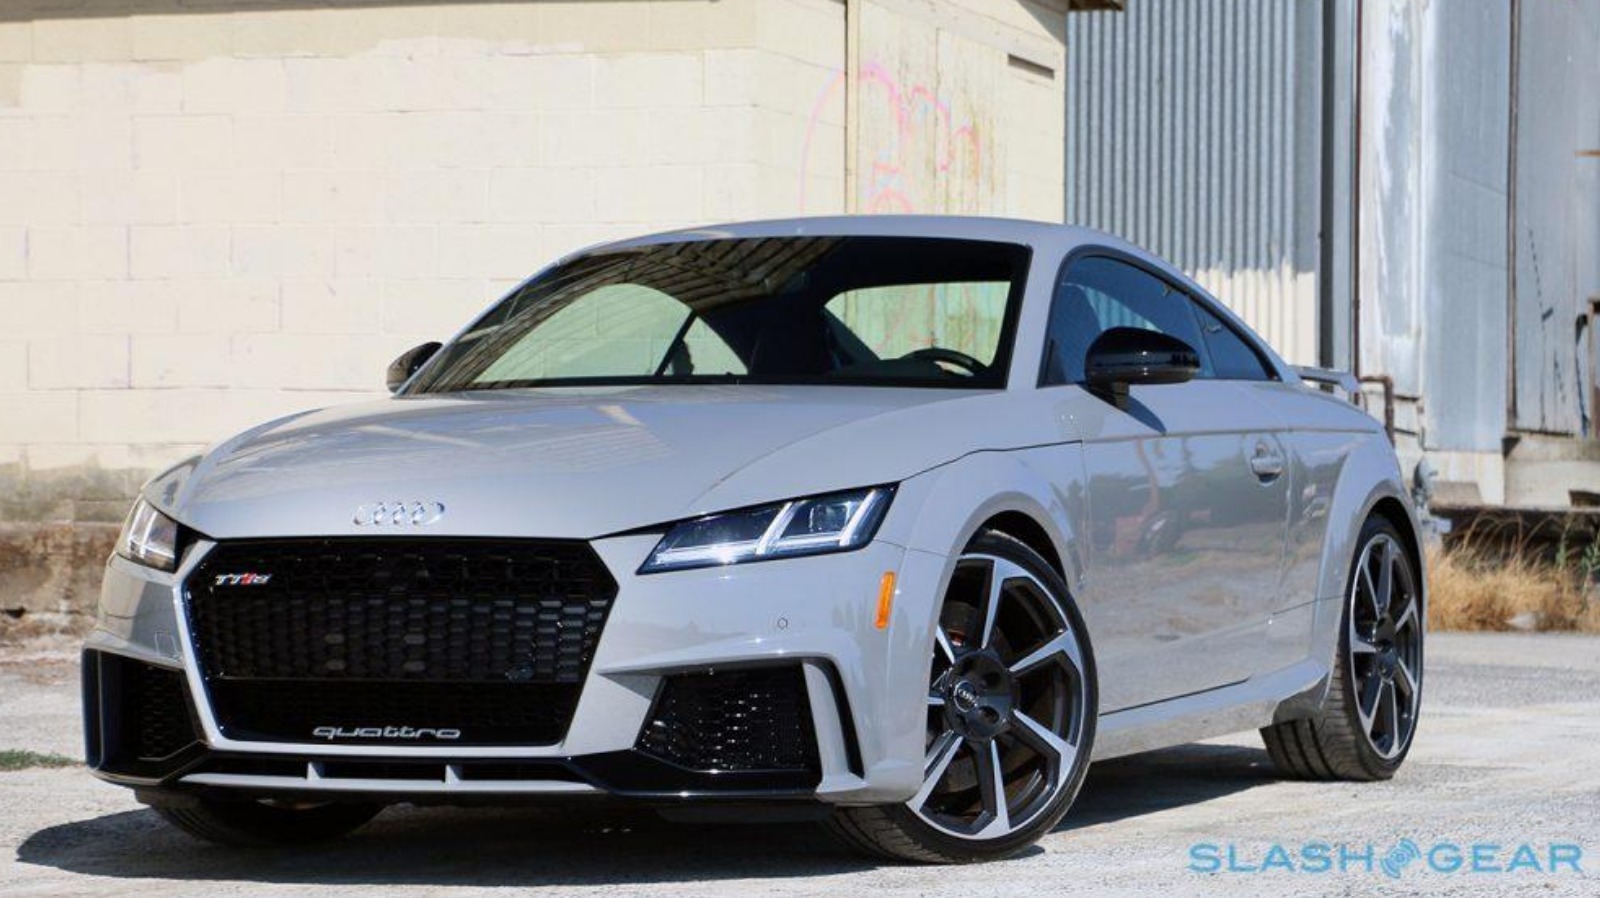 2018 Audi TT RS Coupe Review: Starter Supercar